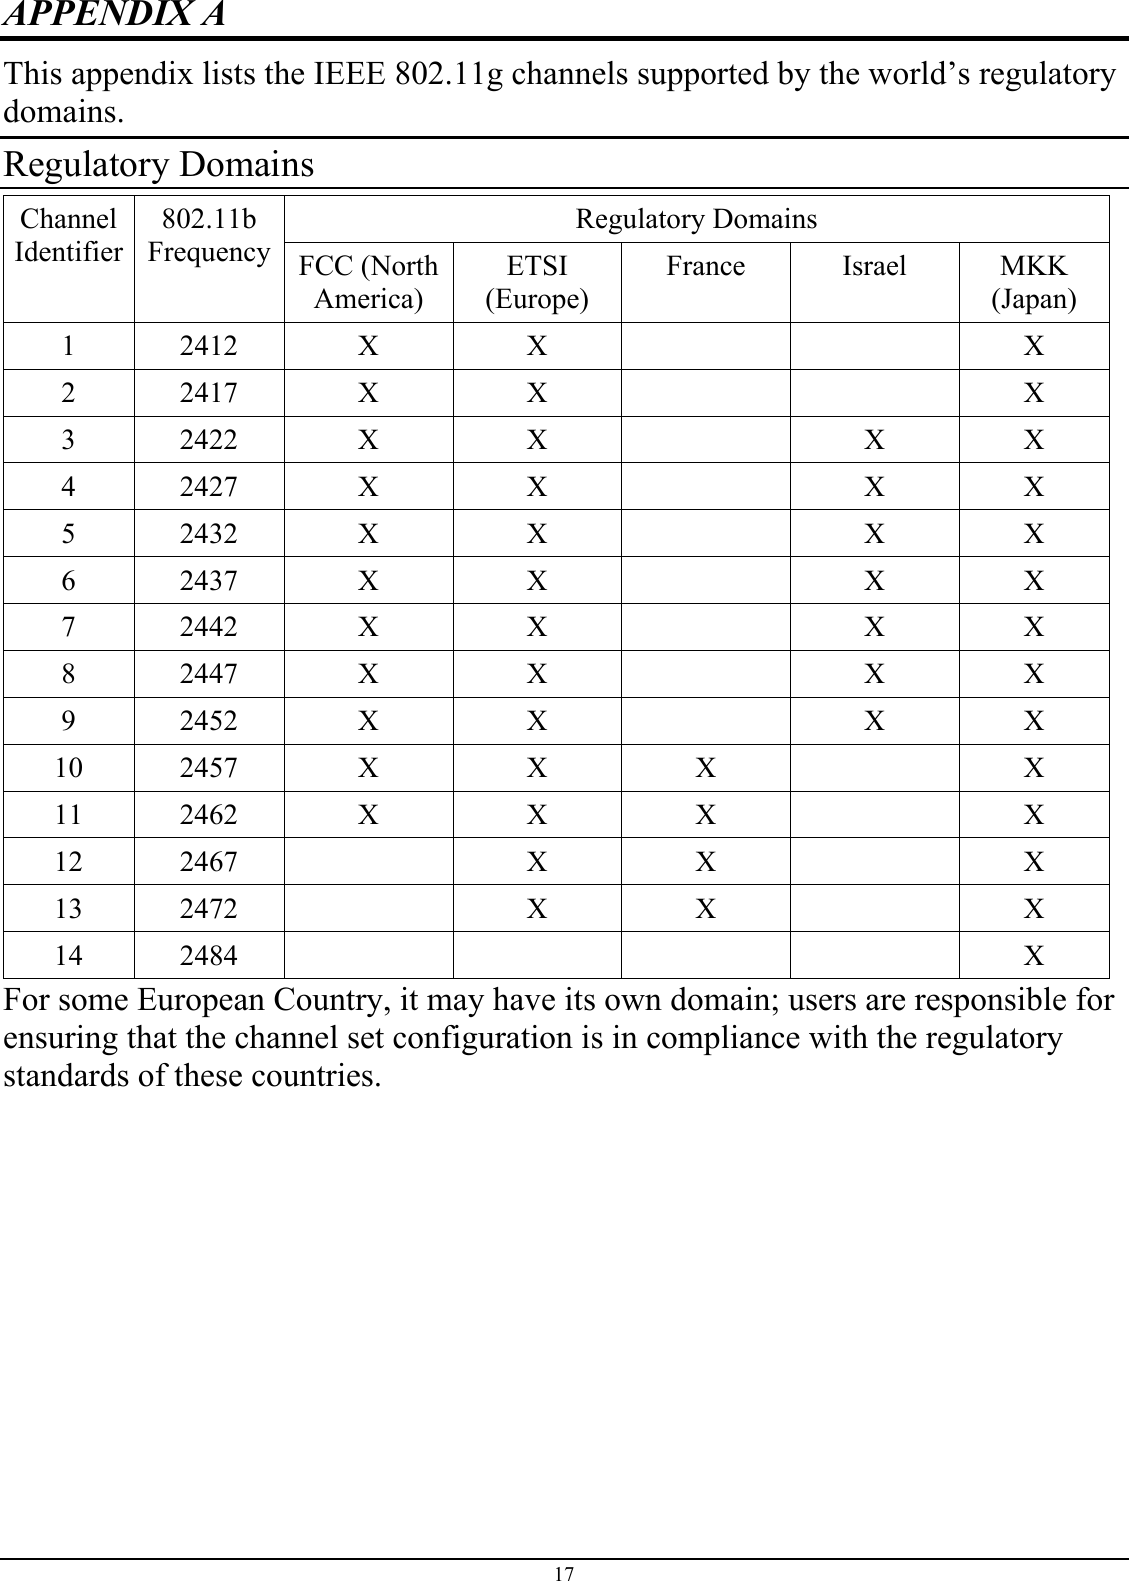 APPENDIX A This appendix lists the IEEE 802.11g channels supported by the world’s regulatory domains.Regulatory Domains Regulatory DomainsChannelIdentifier802.11bFrequency FCC (North America)ETSI(Europe)France Israel MKK(Japan)1 2412 X X X2 2417 X X X3 2422 X X X X4 2427 X X X X5 2432 X X X X6 2437 X X X X7 2442 X X X X8 2447 X X X X9 2452 X X X X10 2457 X X X X11 2462 X X X X12 2467 X X X13 2472 X X X14 2484 XFor some European Country, it may have its own domain; users are responsible for ensuring that the channel set configuration is in compliance with the regulatory standards of these countries. 17